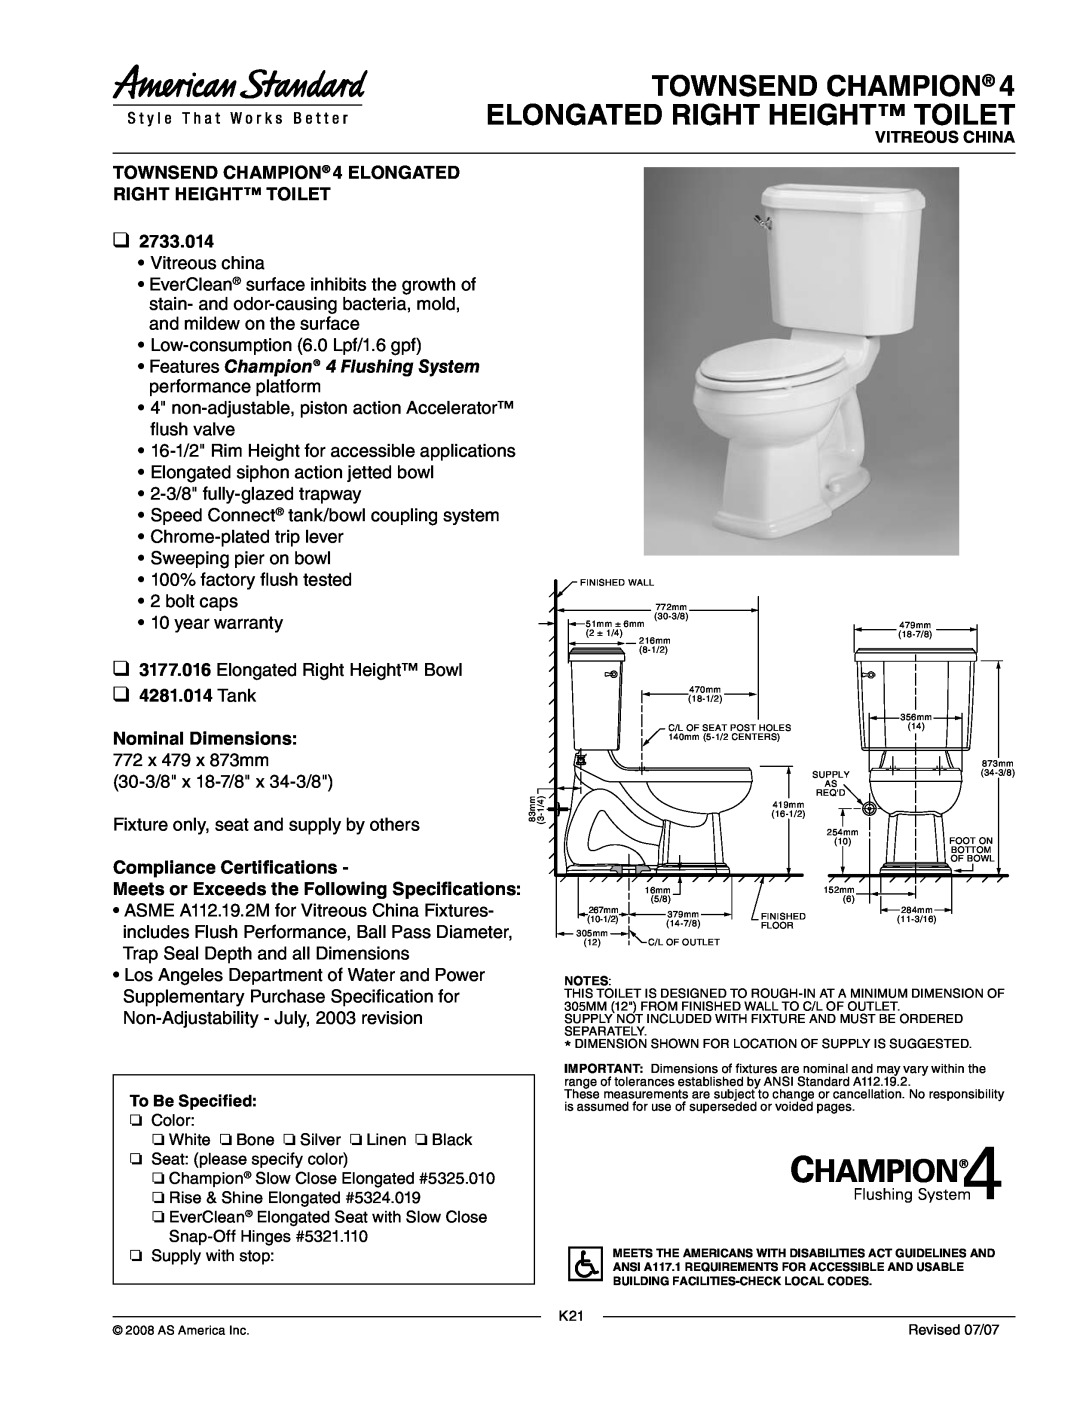 American Standard 2733.014, 3177.016 warranty Townsend Champion Elongated Right Height Toilet, Tank Nominal Dimensions 